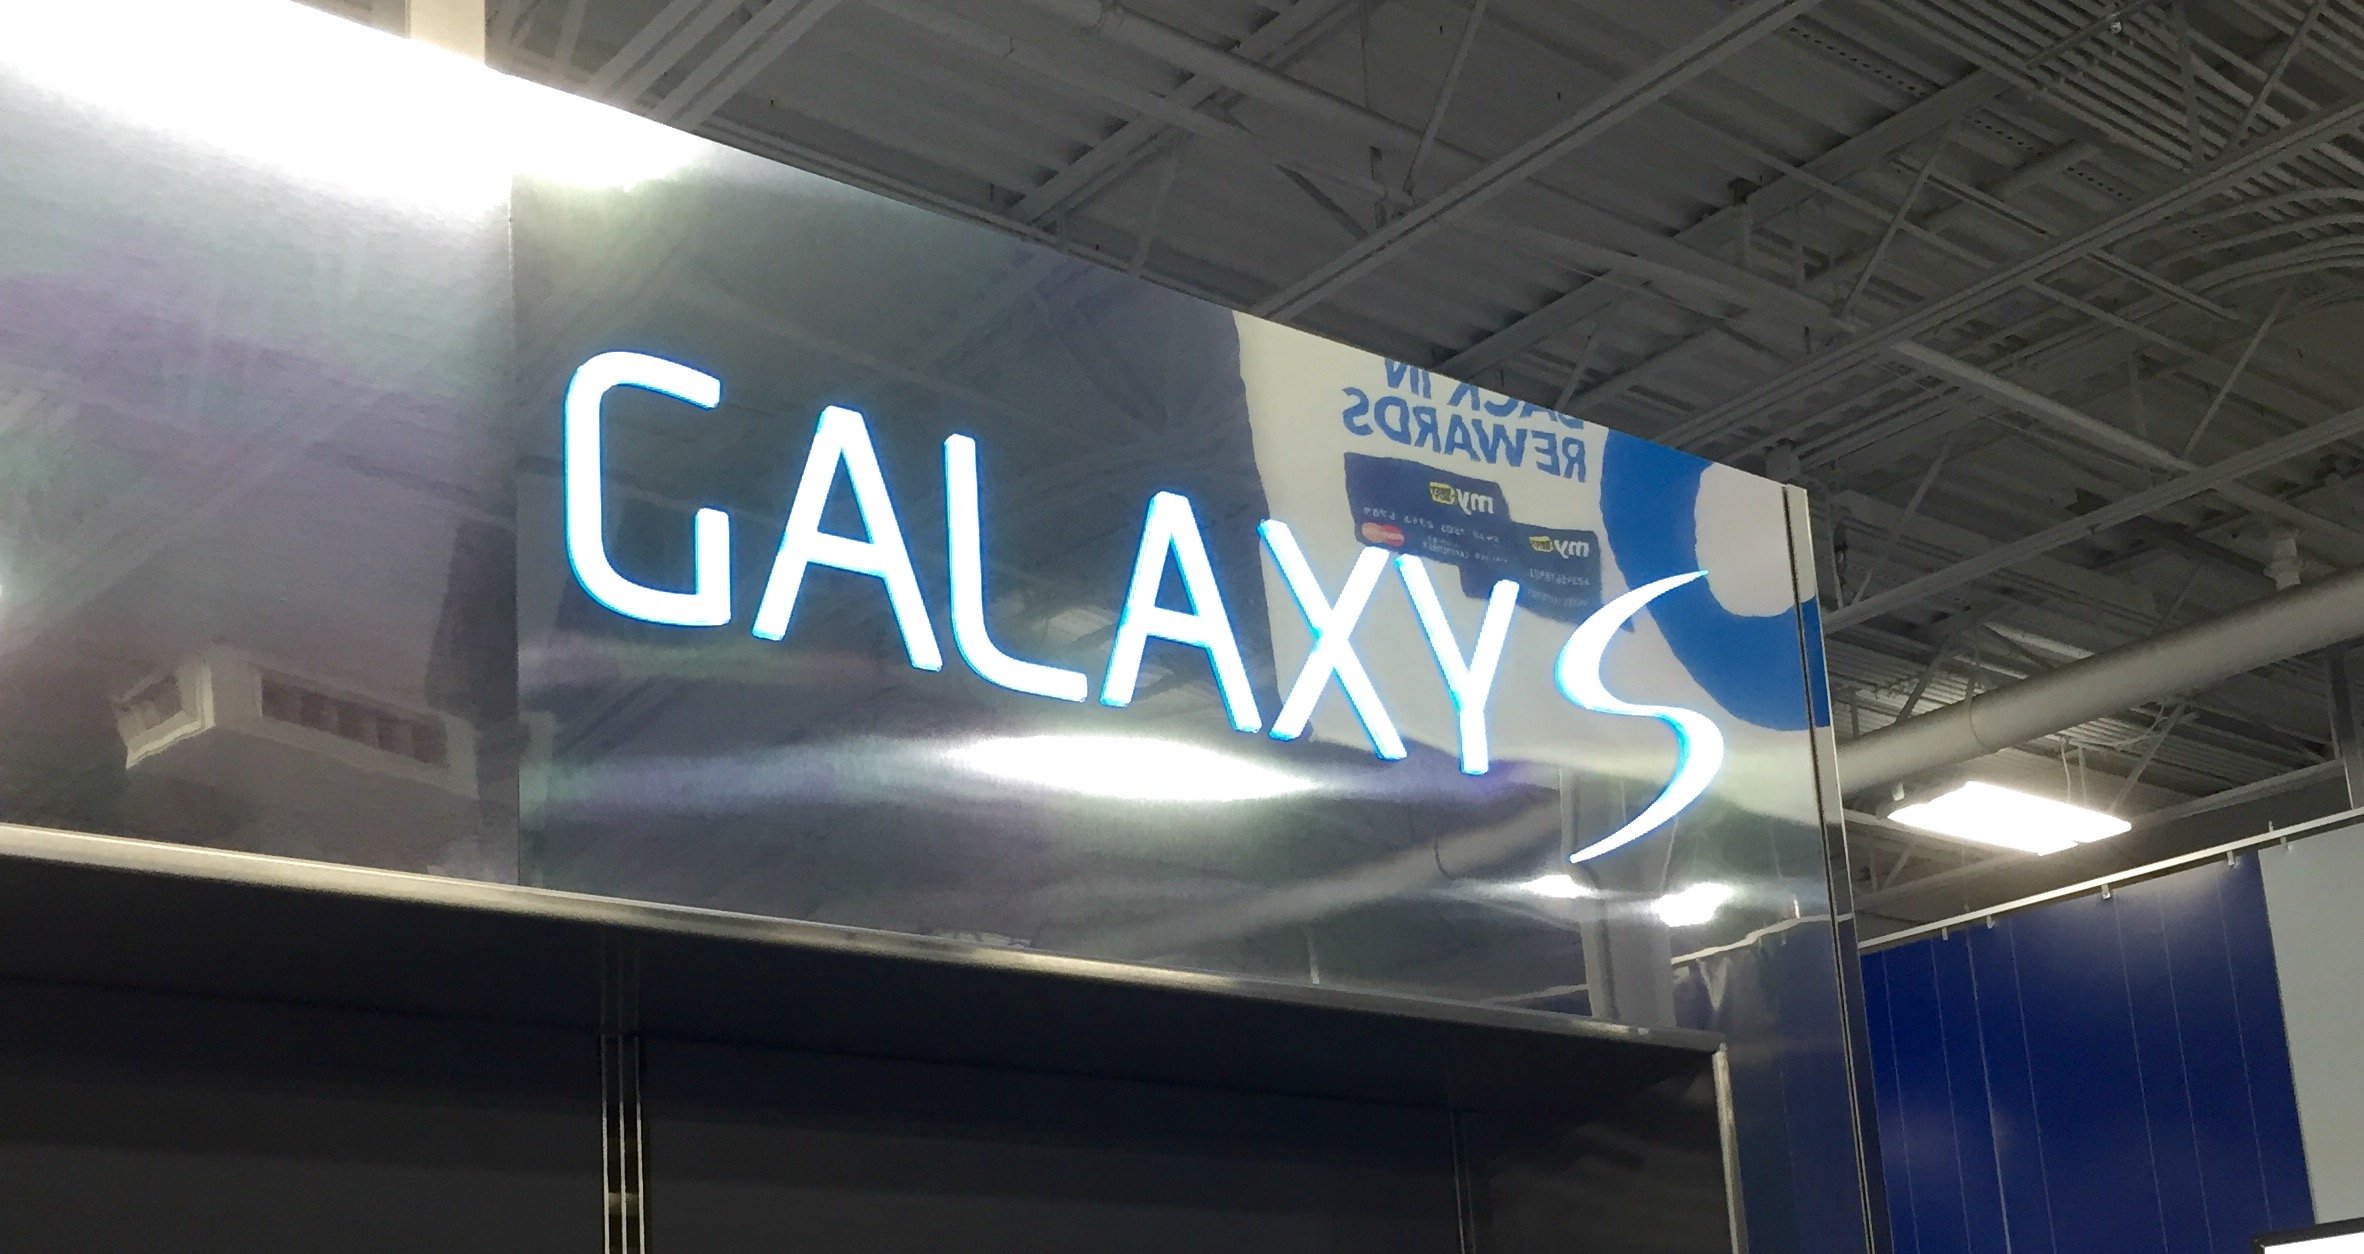 Retailers, carriers and Samsung is ready for a fast Galaxy S6 release date that no one is shy about teasing.